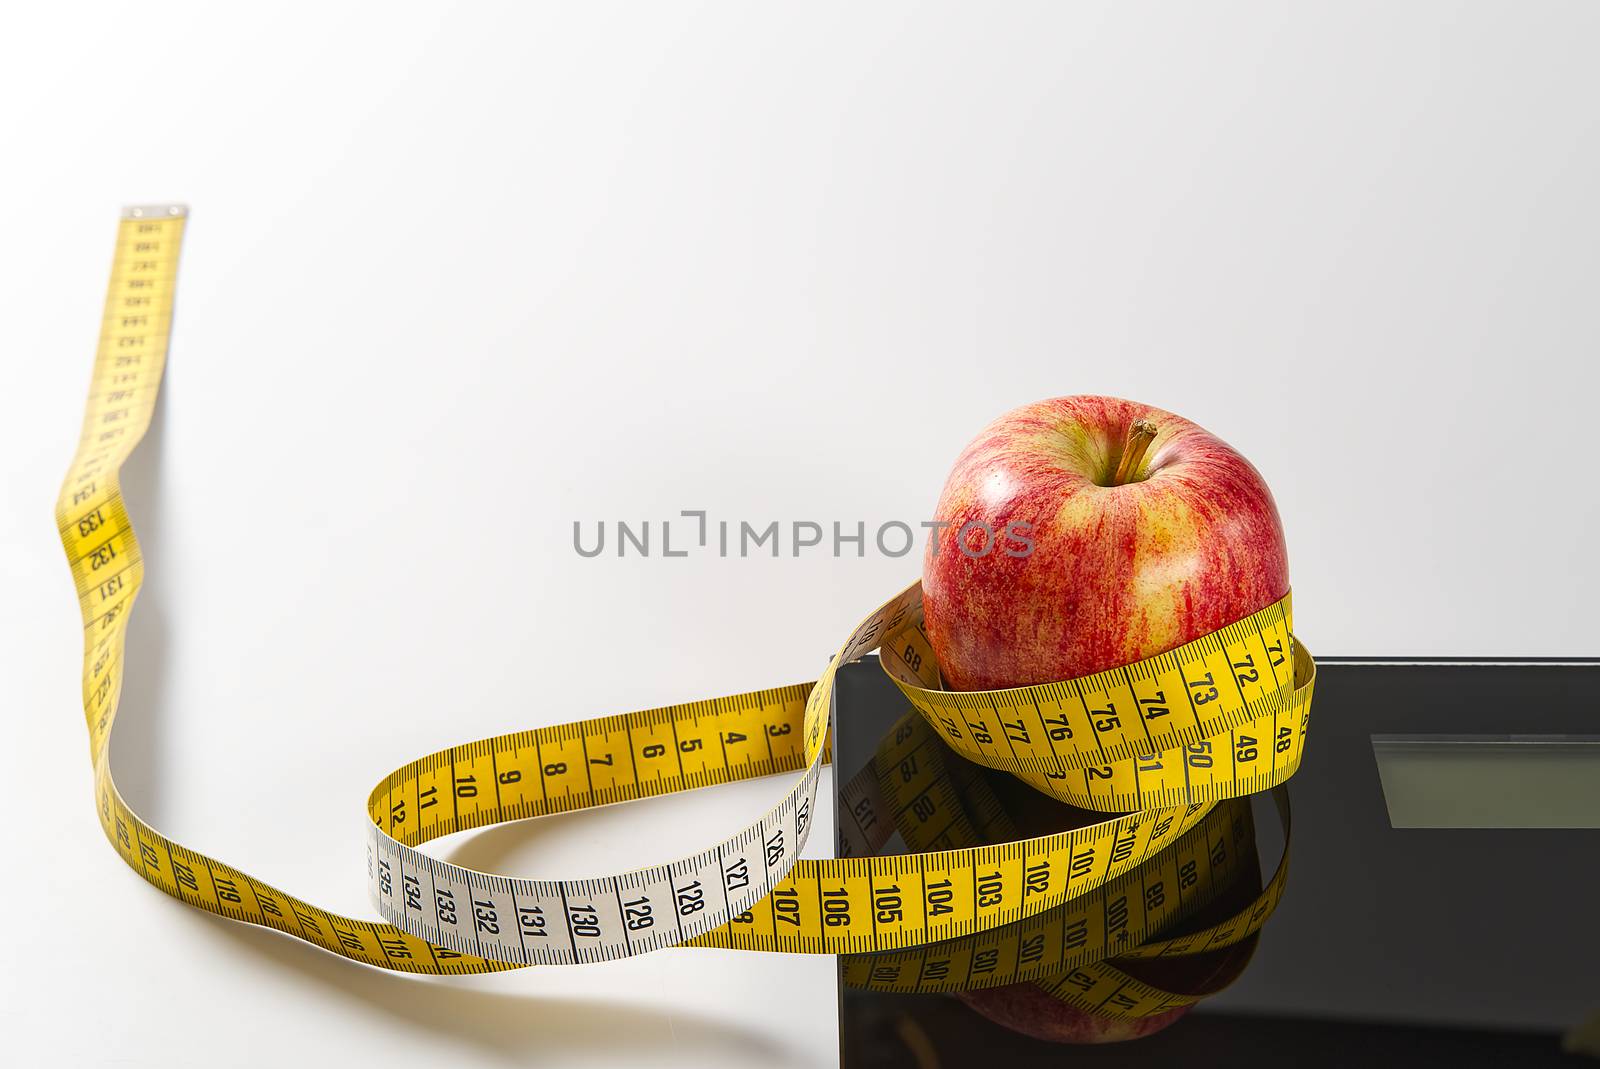 Diet plan, menu or program, tape measure, diet food of fresh fruits on white background, weight loss and detox concept, top view. weight loss concept. Apple and measuring tape. Diet. by PhotoTime